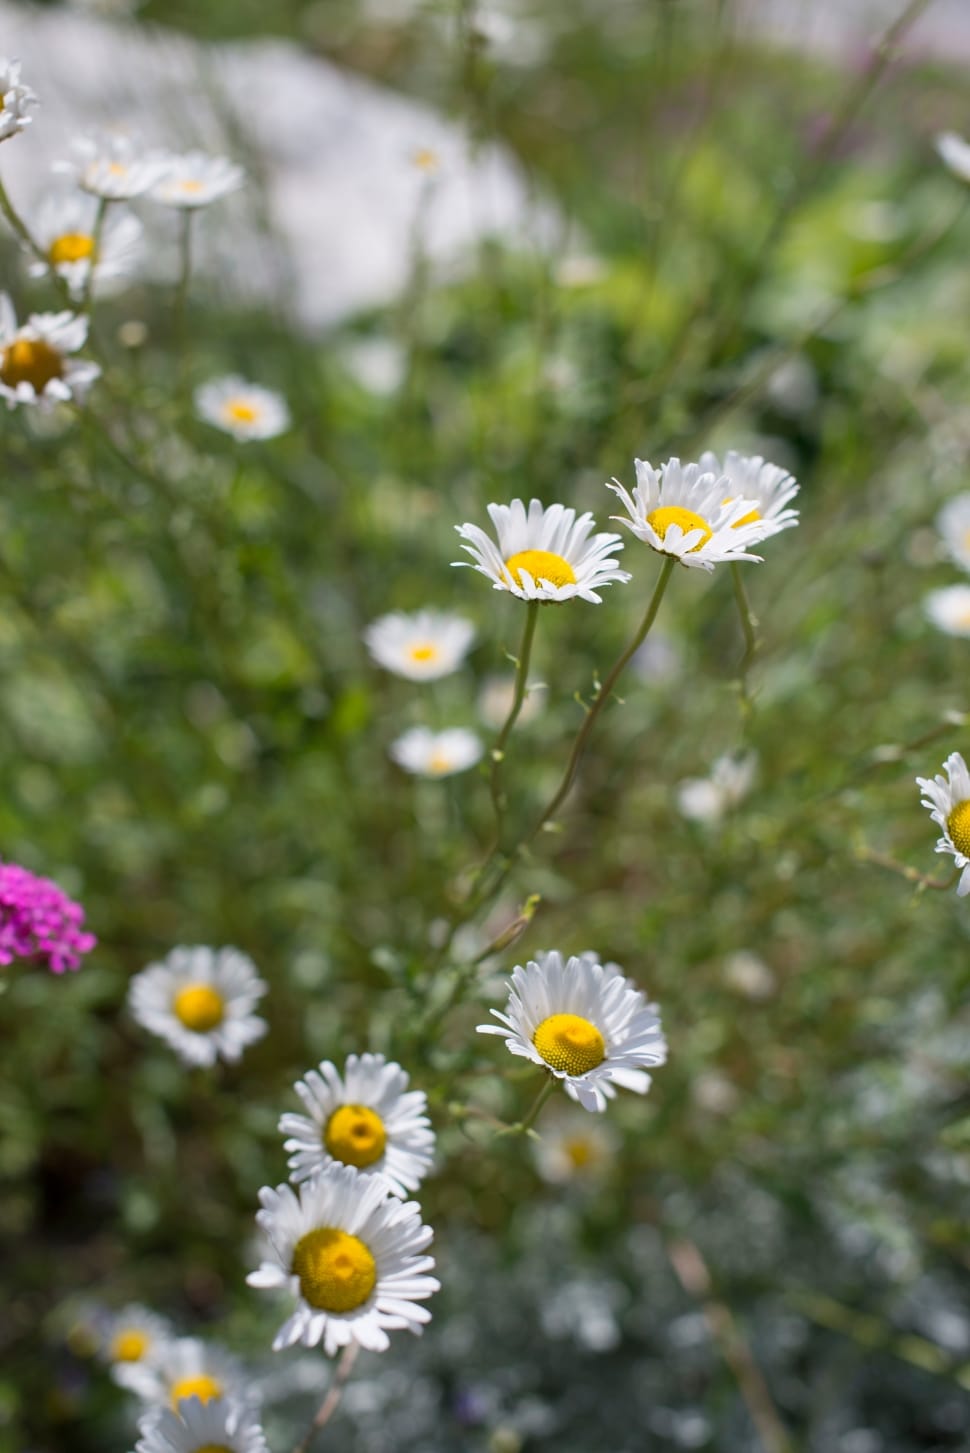 tilt shift photo of white and yellow daisy flowers preview